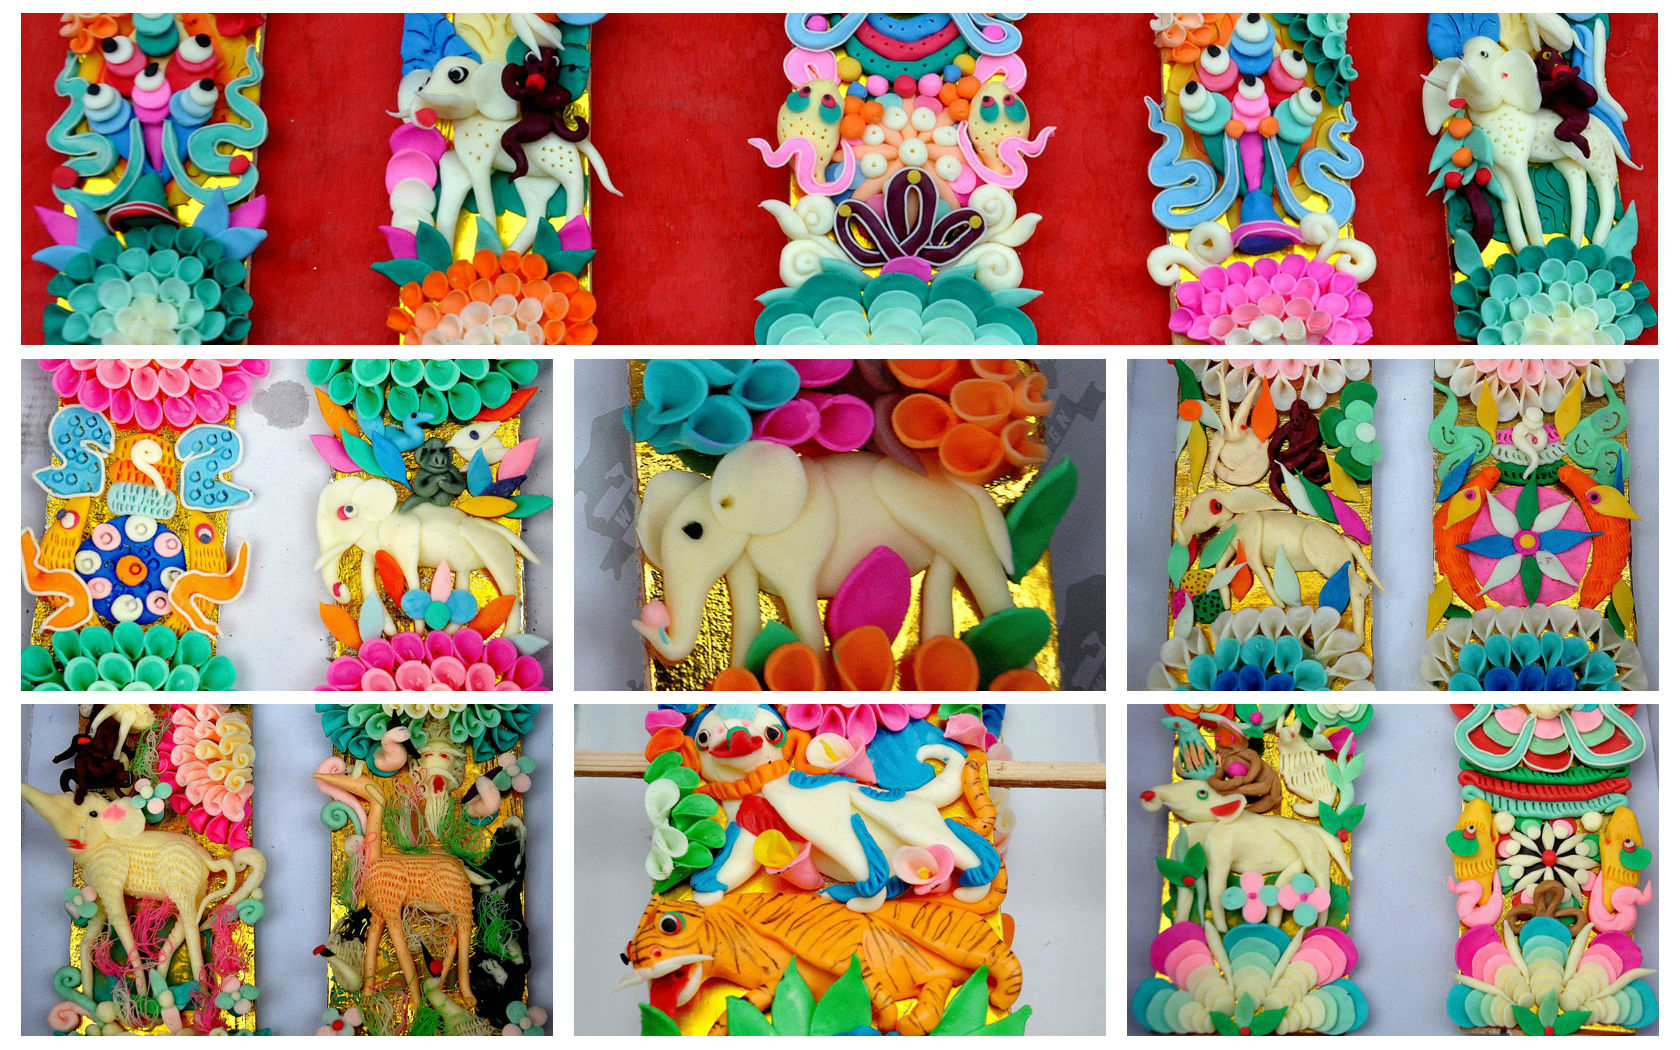 Butter Sculpture Festival Celebrated in Jampaling Monastery, Chamdo